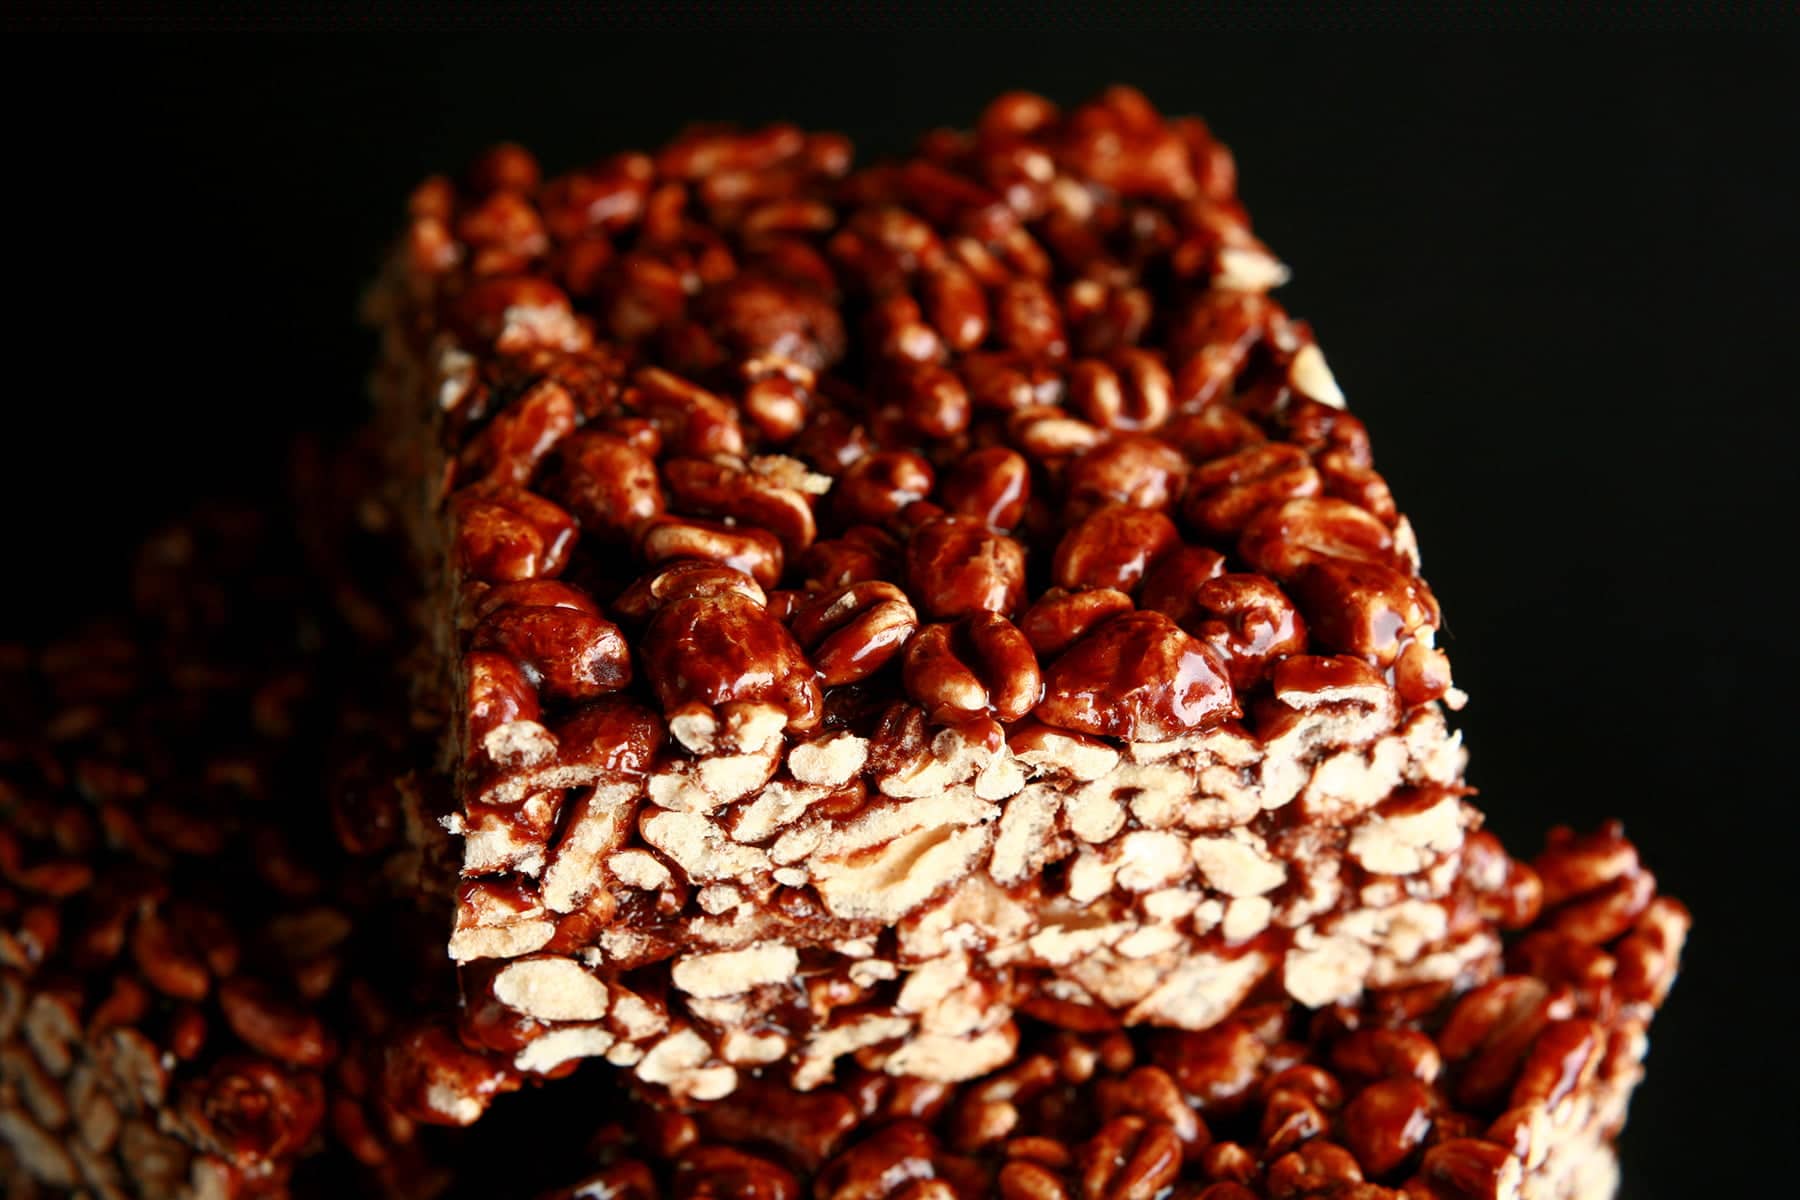 A small glass plate stacked with large pieces of puffed wheat bars.